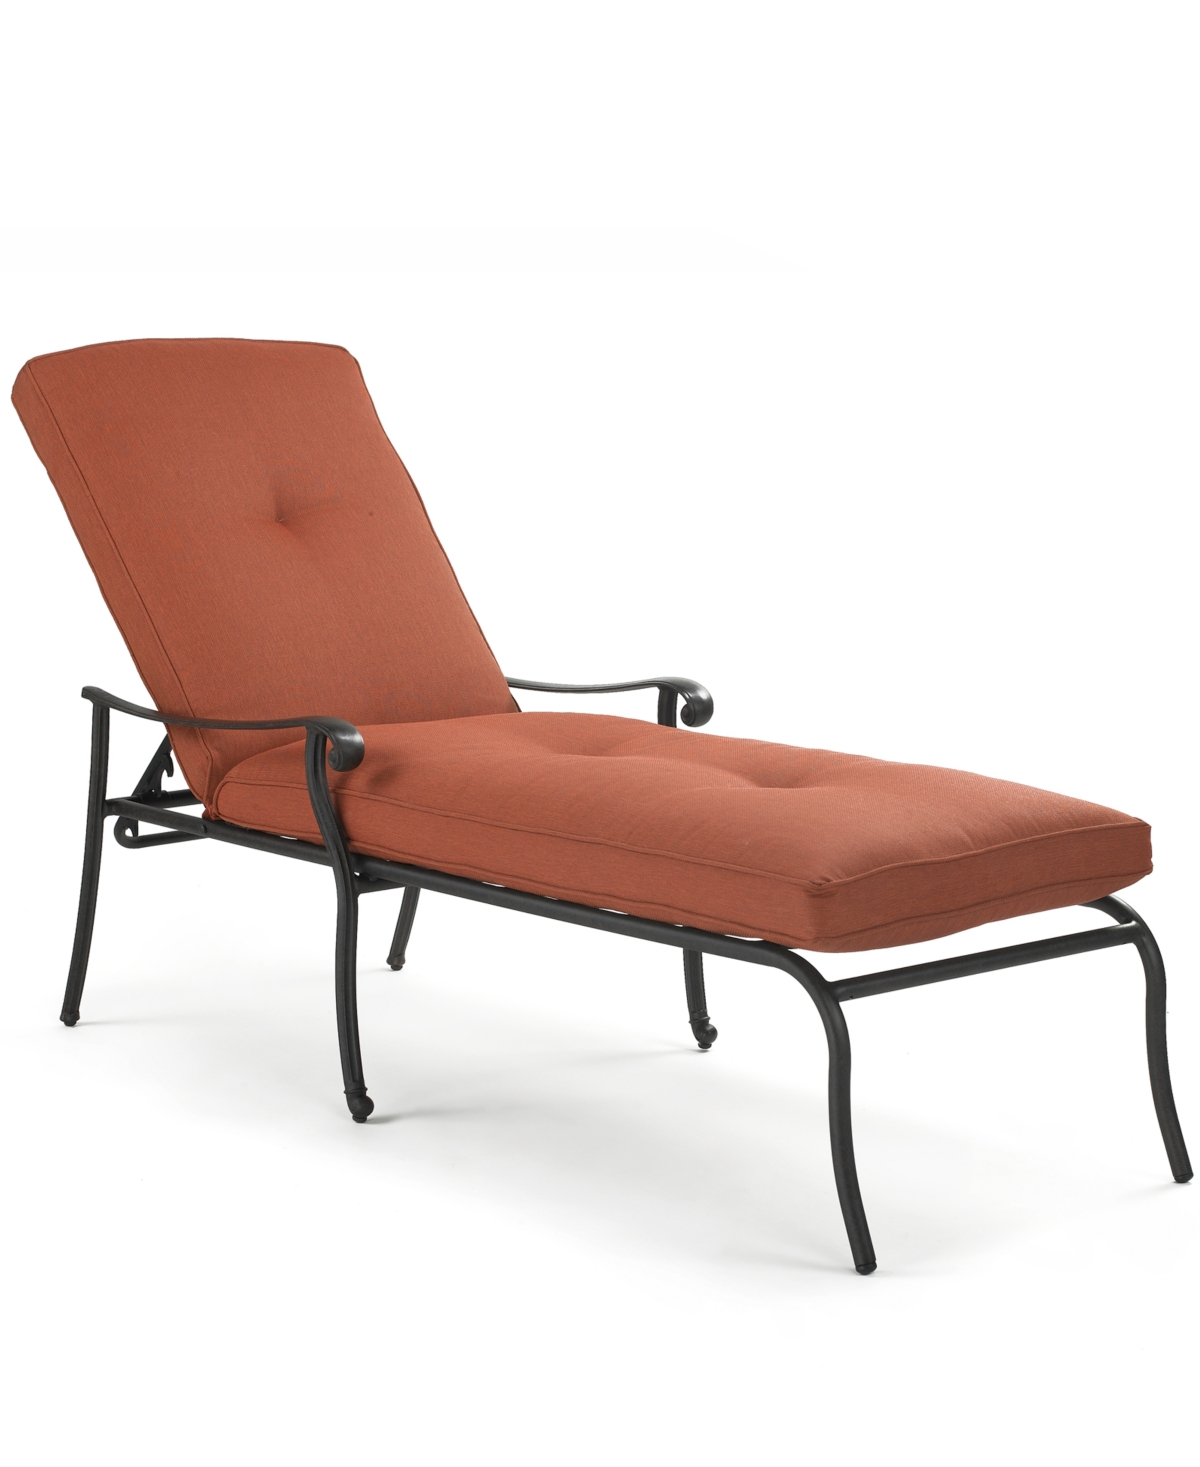 Furniture Chateau Cast Aluminum Outdoor Chaise Lounge, Created For Macy's In Brick Red